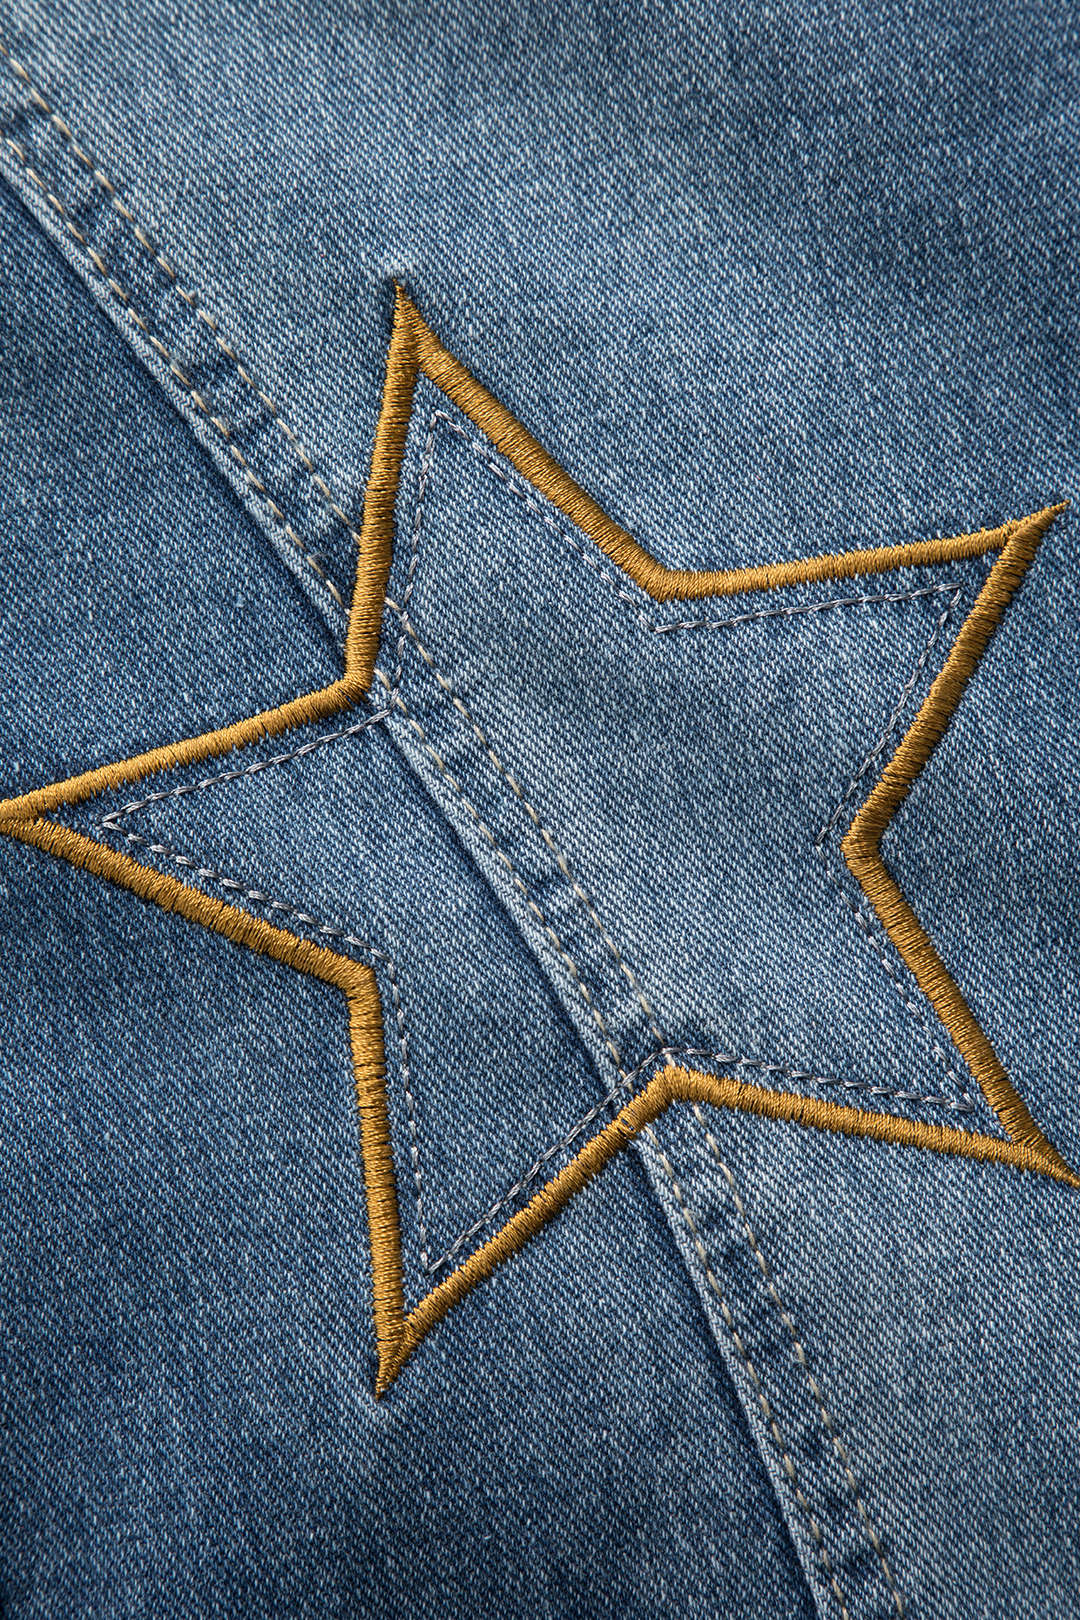 Star Embroidery Straight Leg Jeans